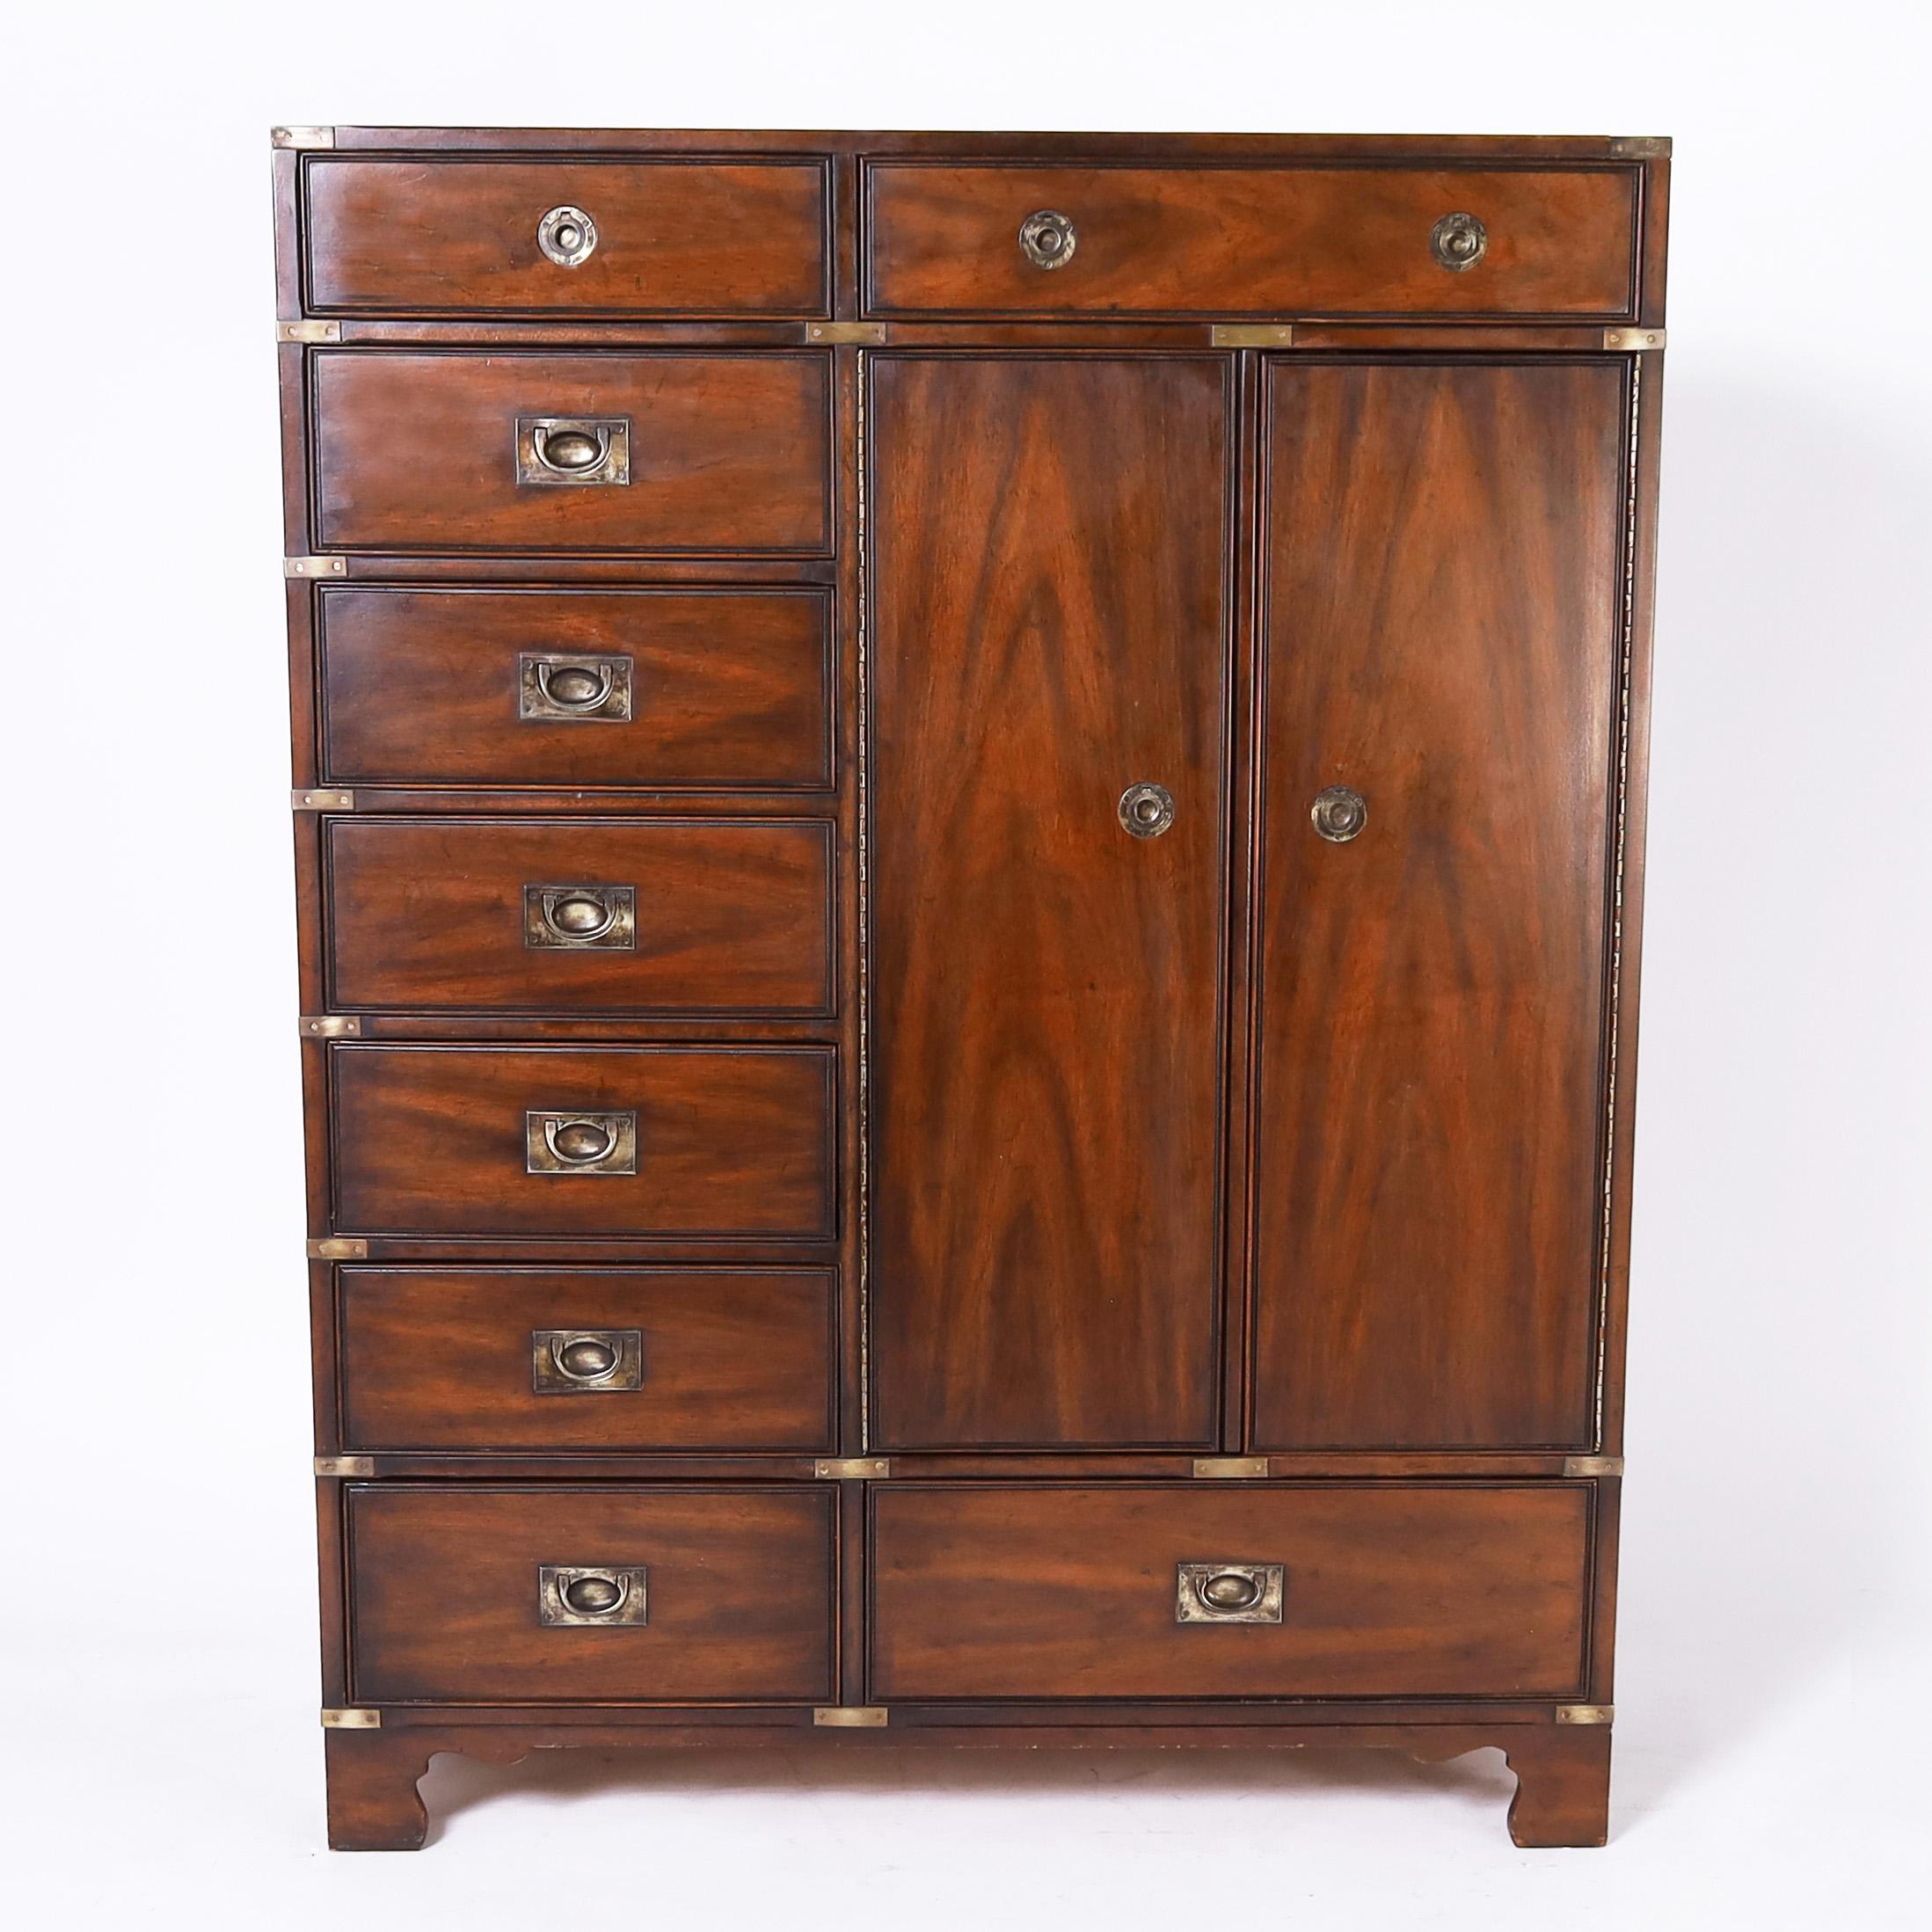 Mid Century interpretation of a British colonial campaign gentleman's wardrobe crafted in mahogany having a lush dark finish, brass hardware, plenty of storage and classic bracket feet. Made by one of America's premiere furniture makers, signed